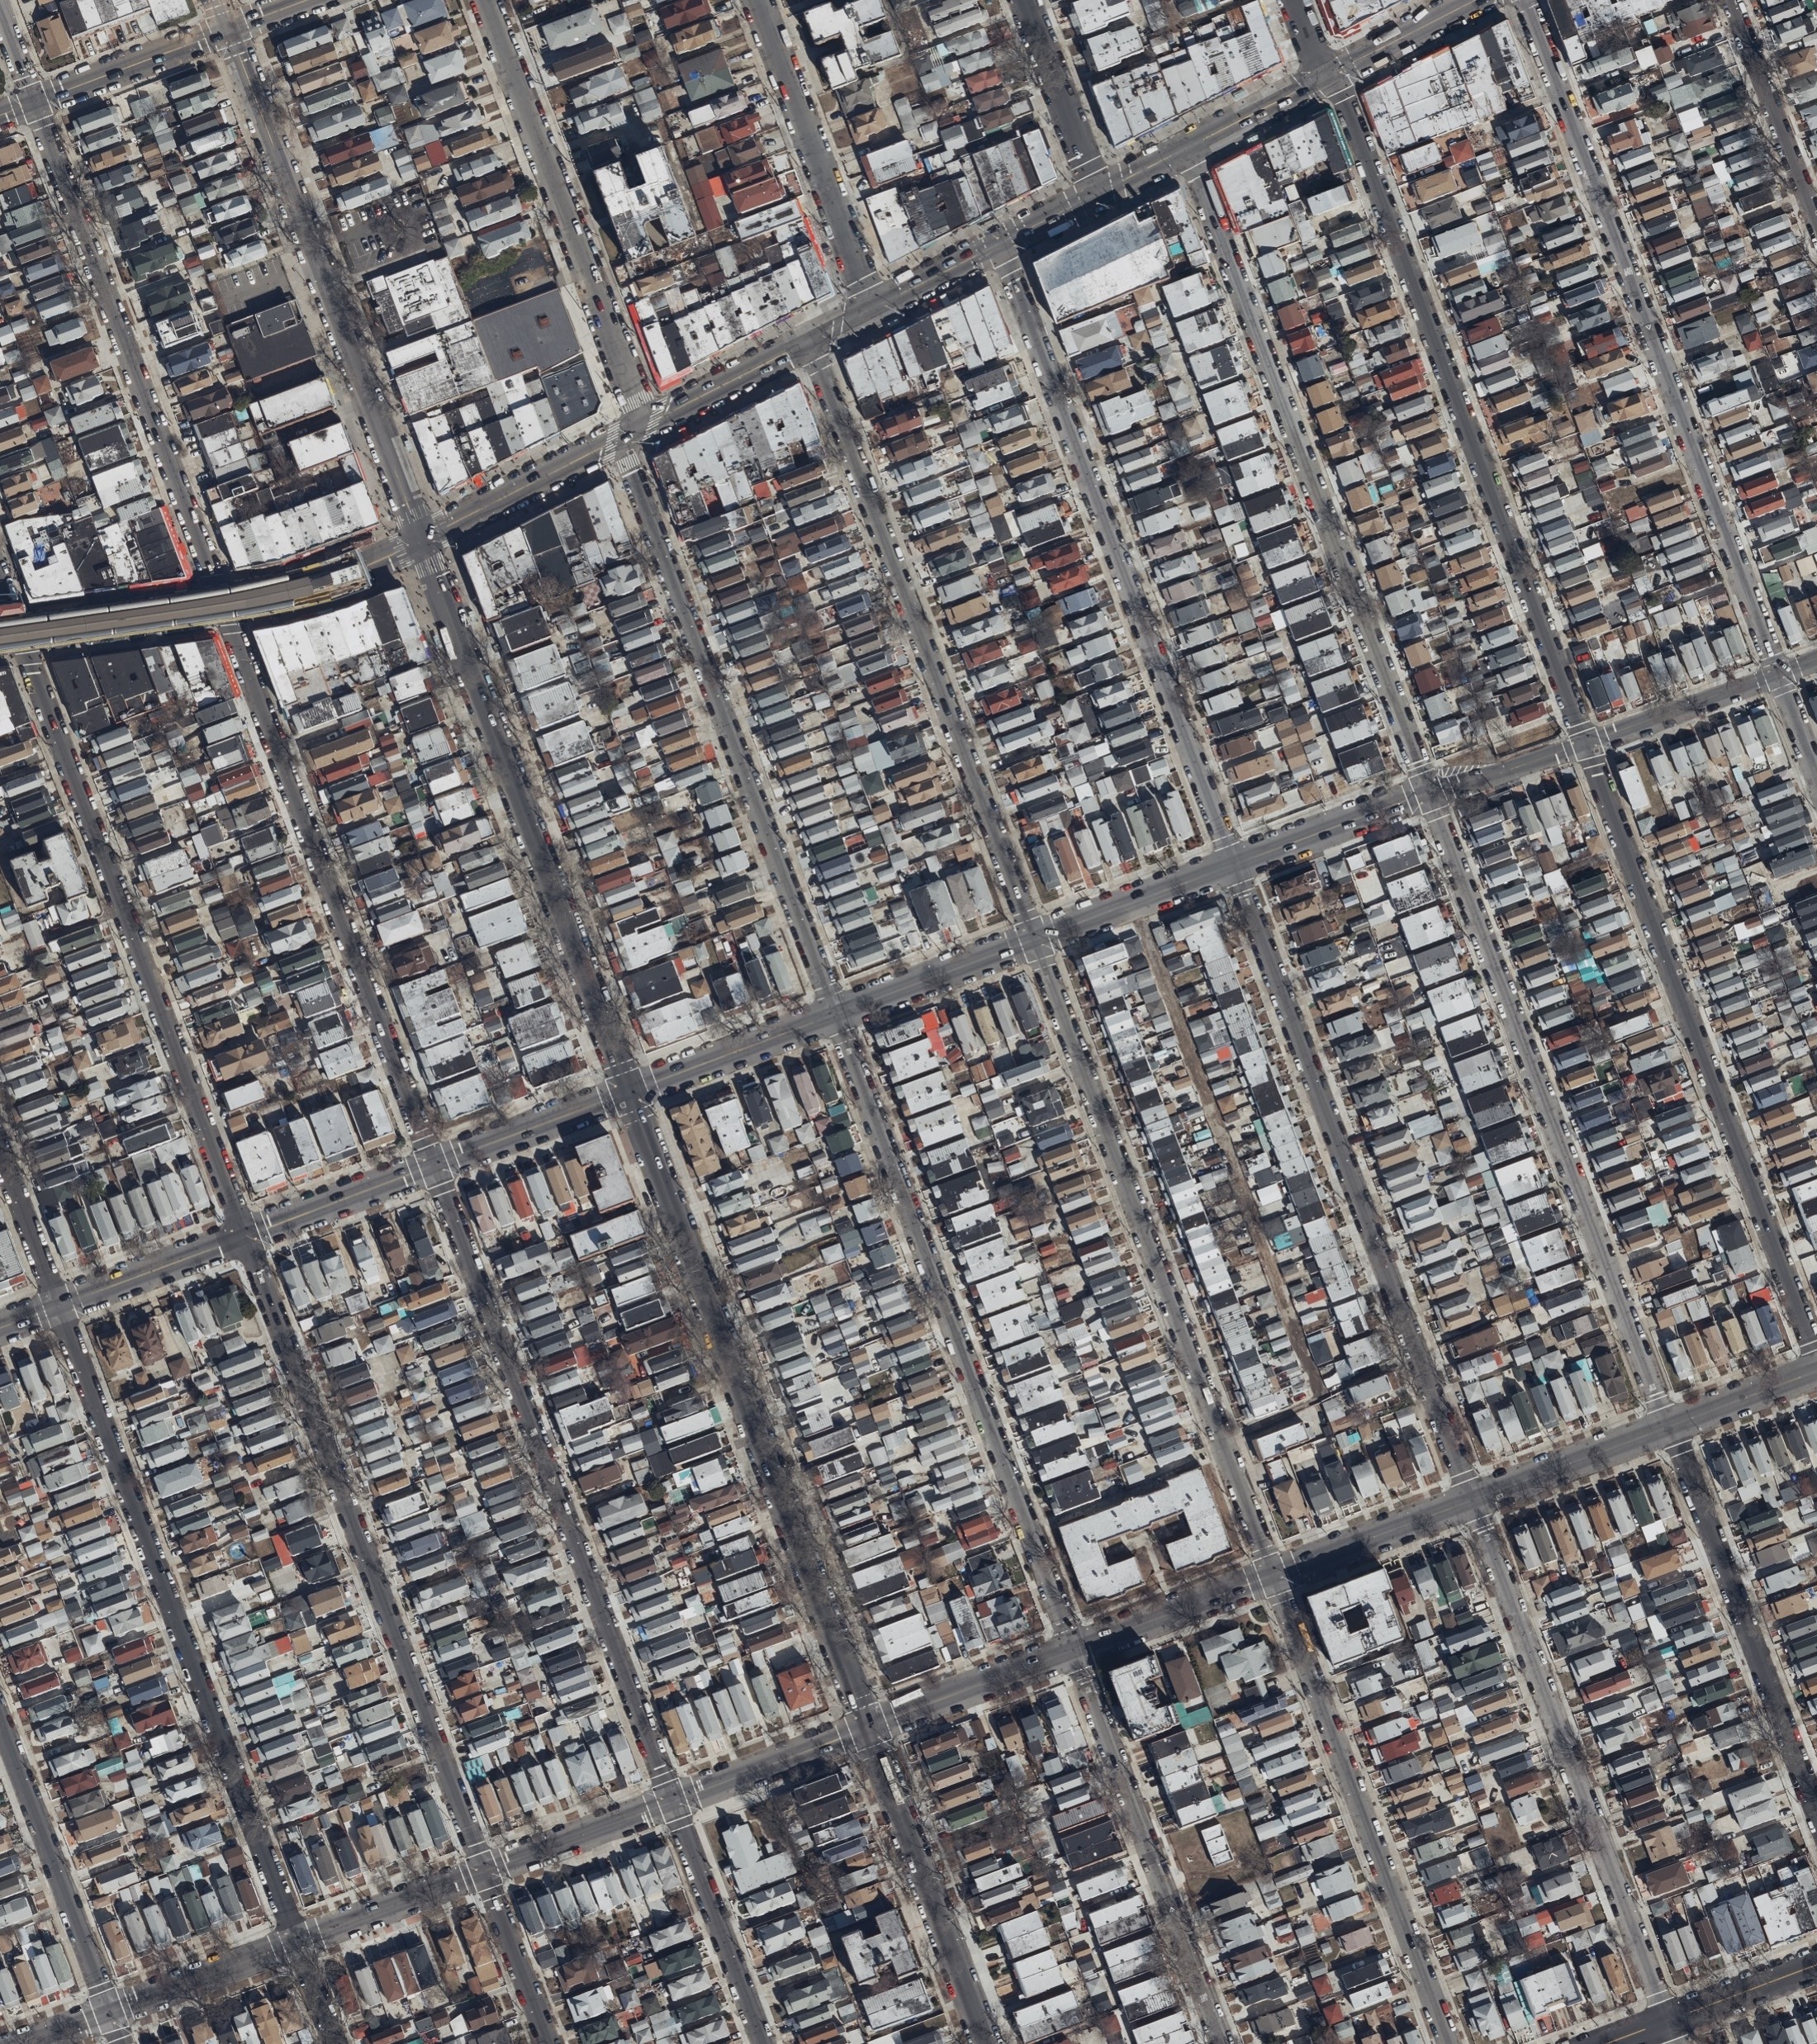 Satellite image of Ozone Park in Queens, NYC